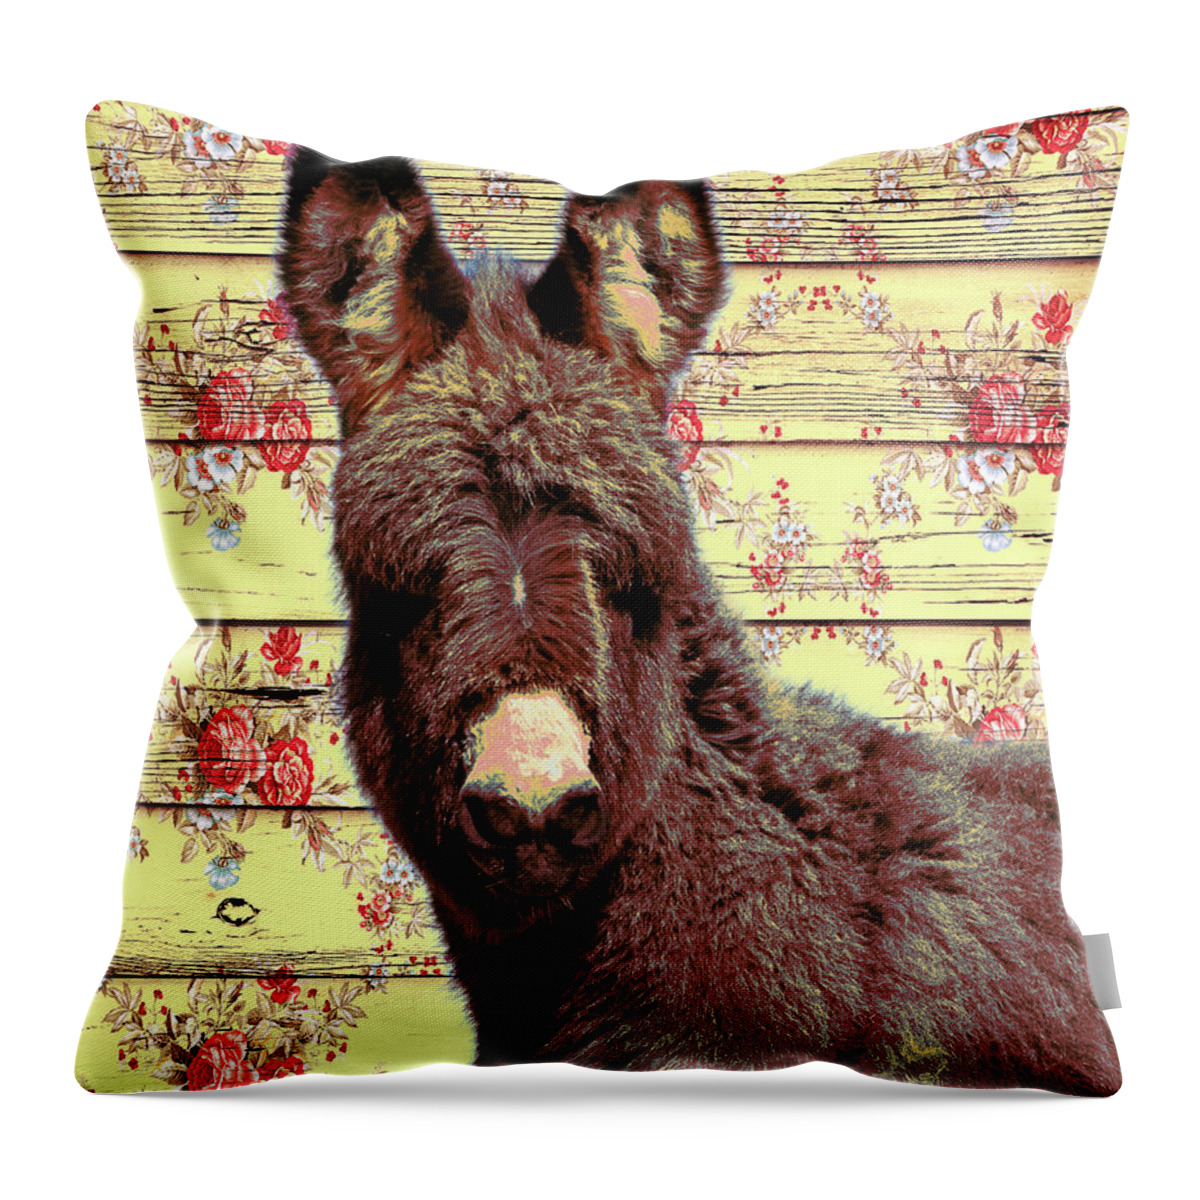 Wild Burros Throw Pillow featuring the photograph Flower by Mary Hone